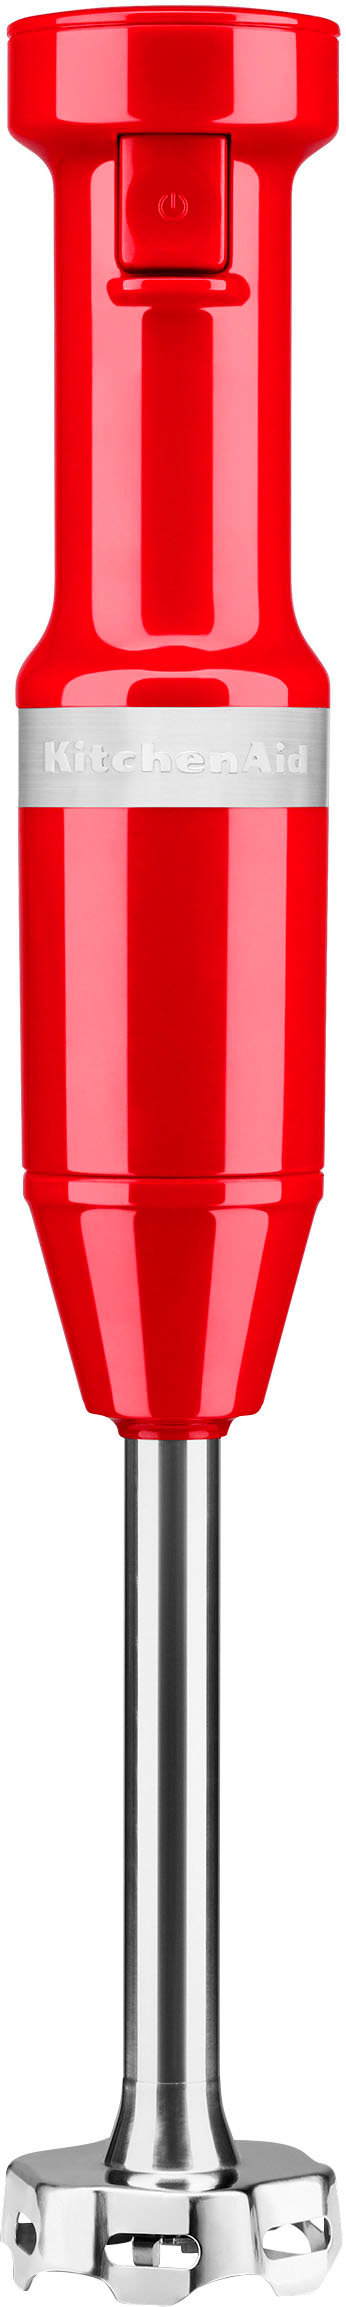 KitchenAid Cordless Variable Speed Hand Blender in Passion Red